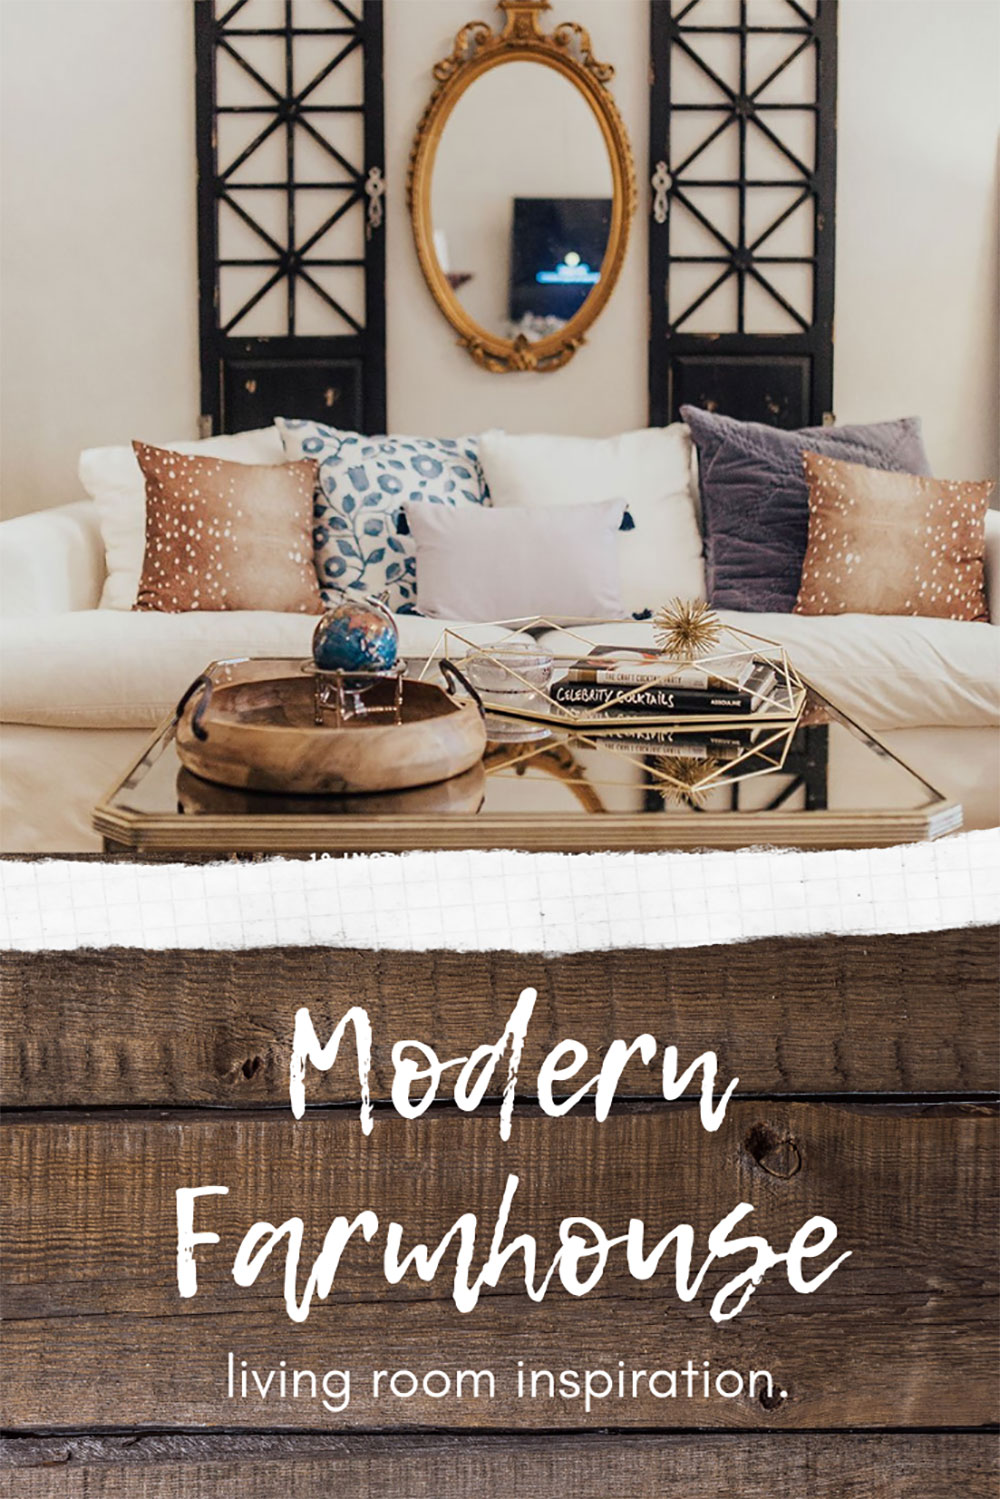 The Farmhouse: Trendy Women's Clothing, Gifts & Home Decor